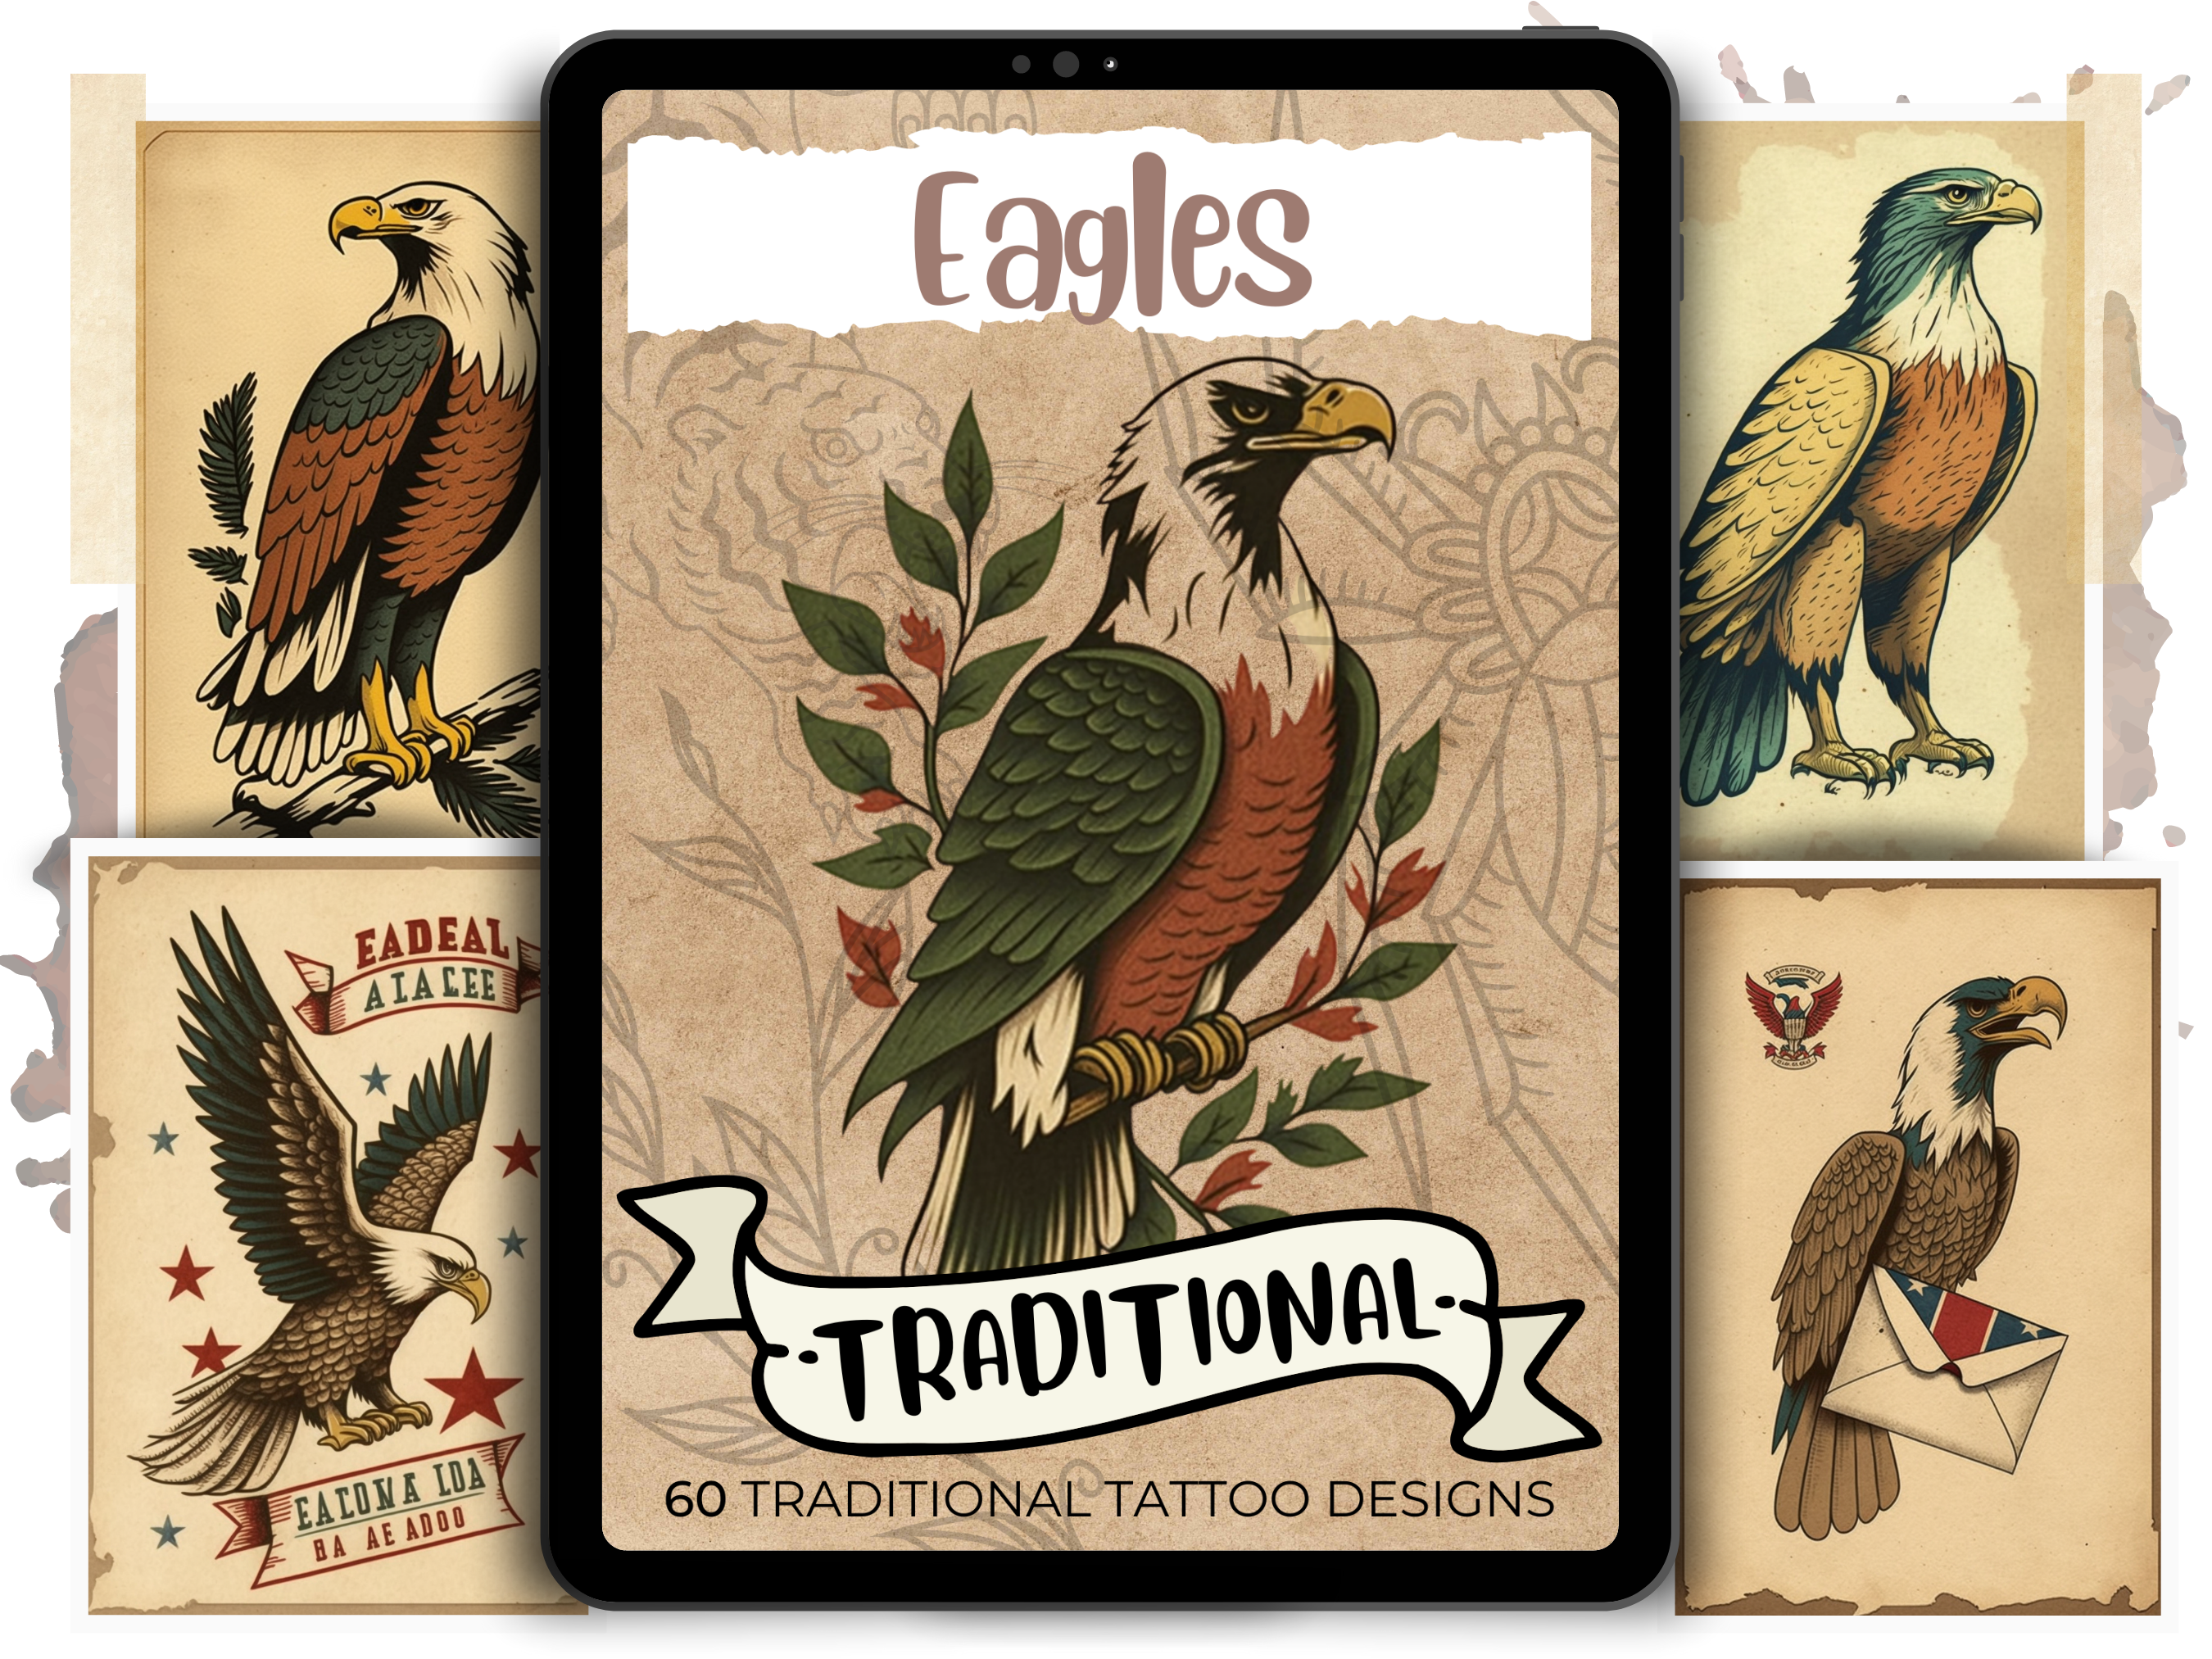 Eagle and Shield Tattoo – Out of Kit